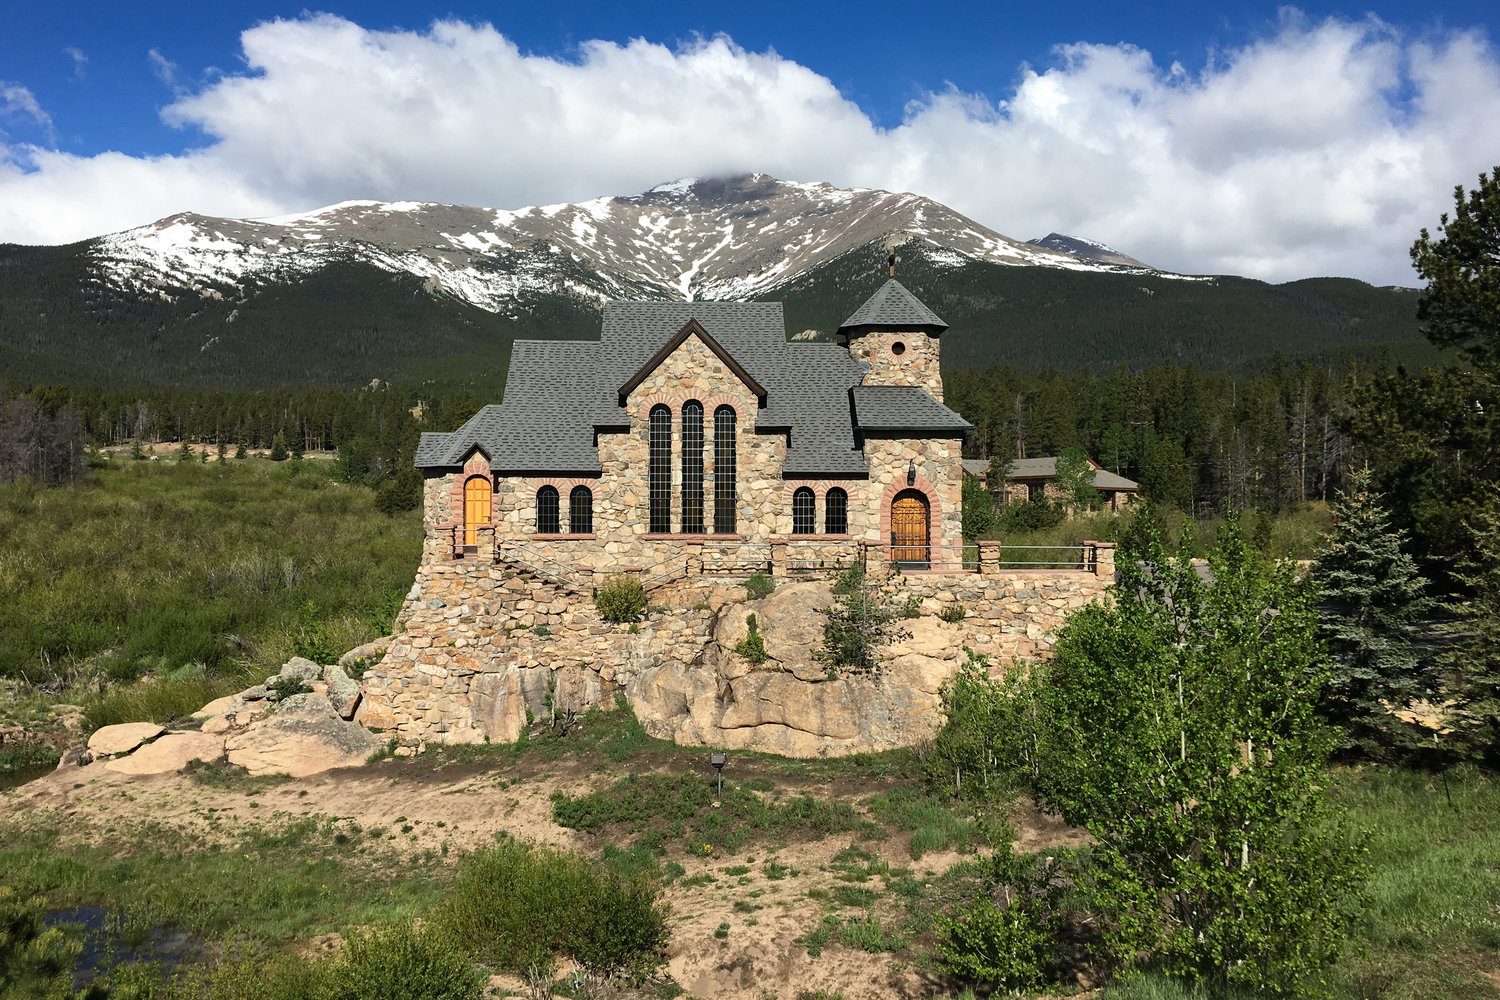 The Chapel on the Rock, formally named St. Catherine of Siena Chapel, is seen June 19, 2019, in Allenspark, Colorado, near Estes Park. The chapel is on the grounds of the Camp St. Malo Retreat Center, which was made famous during St. John Paul II’s epic World Youth Day visit to the Denver in 1993.